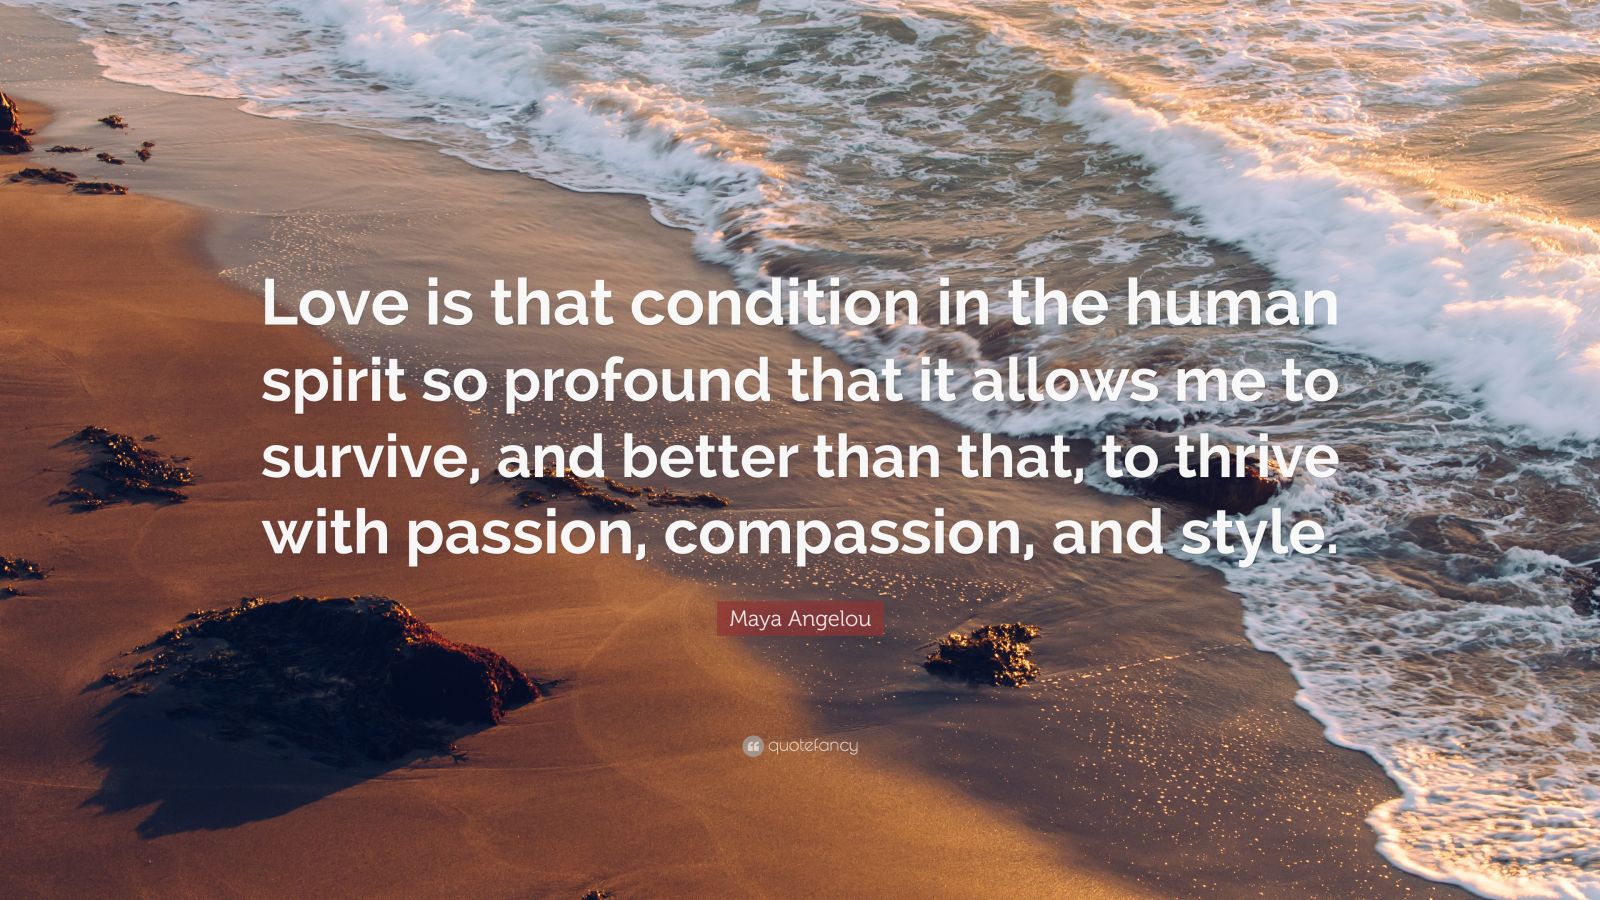 Maya Angelou Quote: “Love is that condition in the human spirit so ...